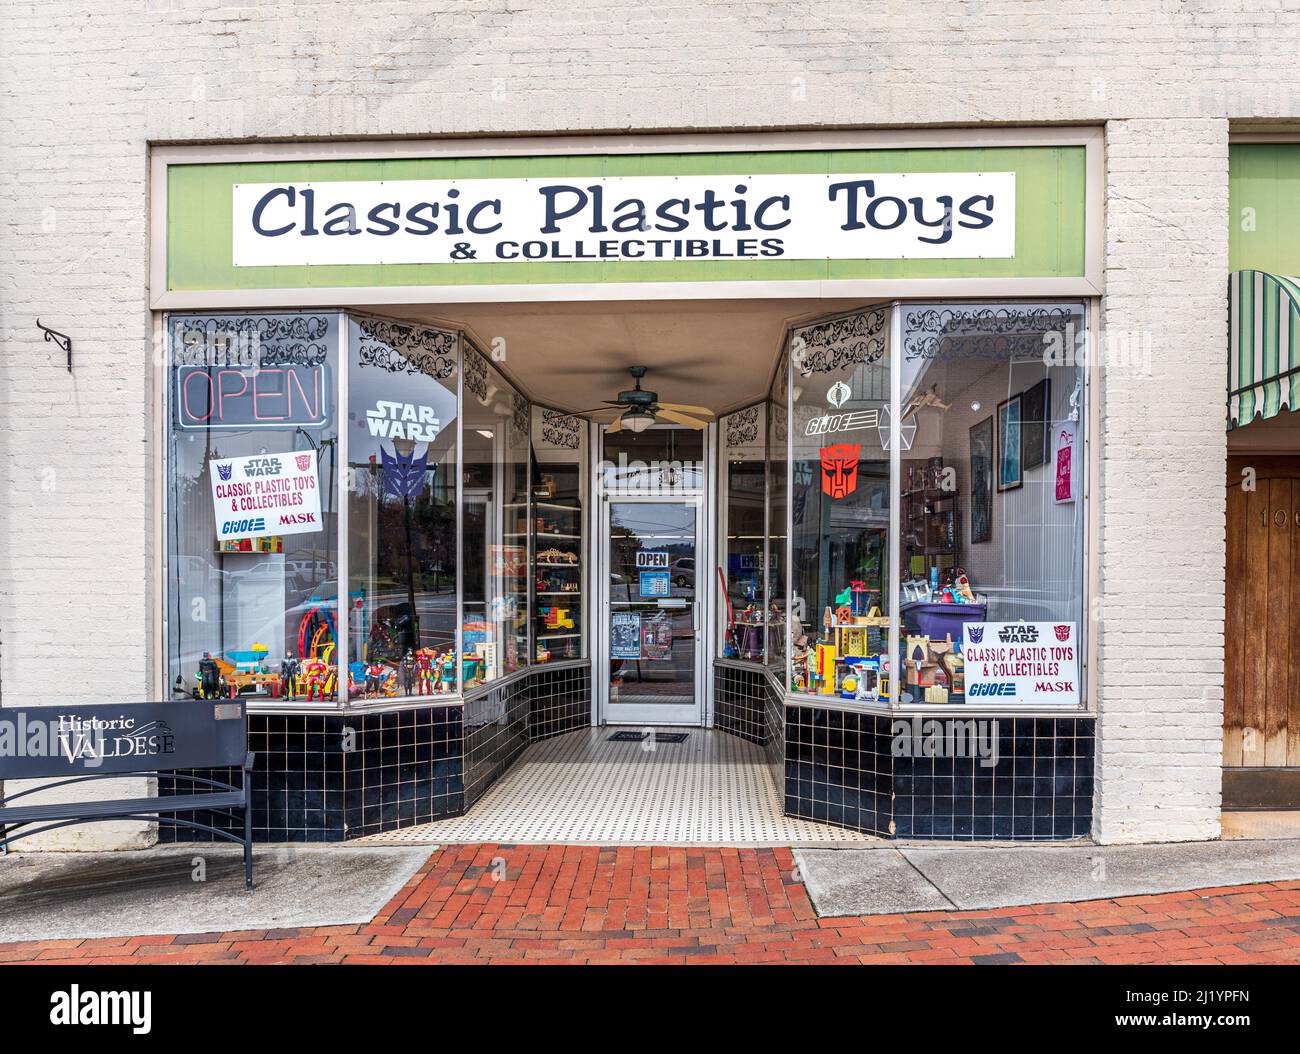 VALDESE, NC, USA-24 MARCH 2022: Classic Plastic Toys & Collectibles, a store on Main Street, wiith colorful display windows. Stock Photo